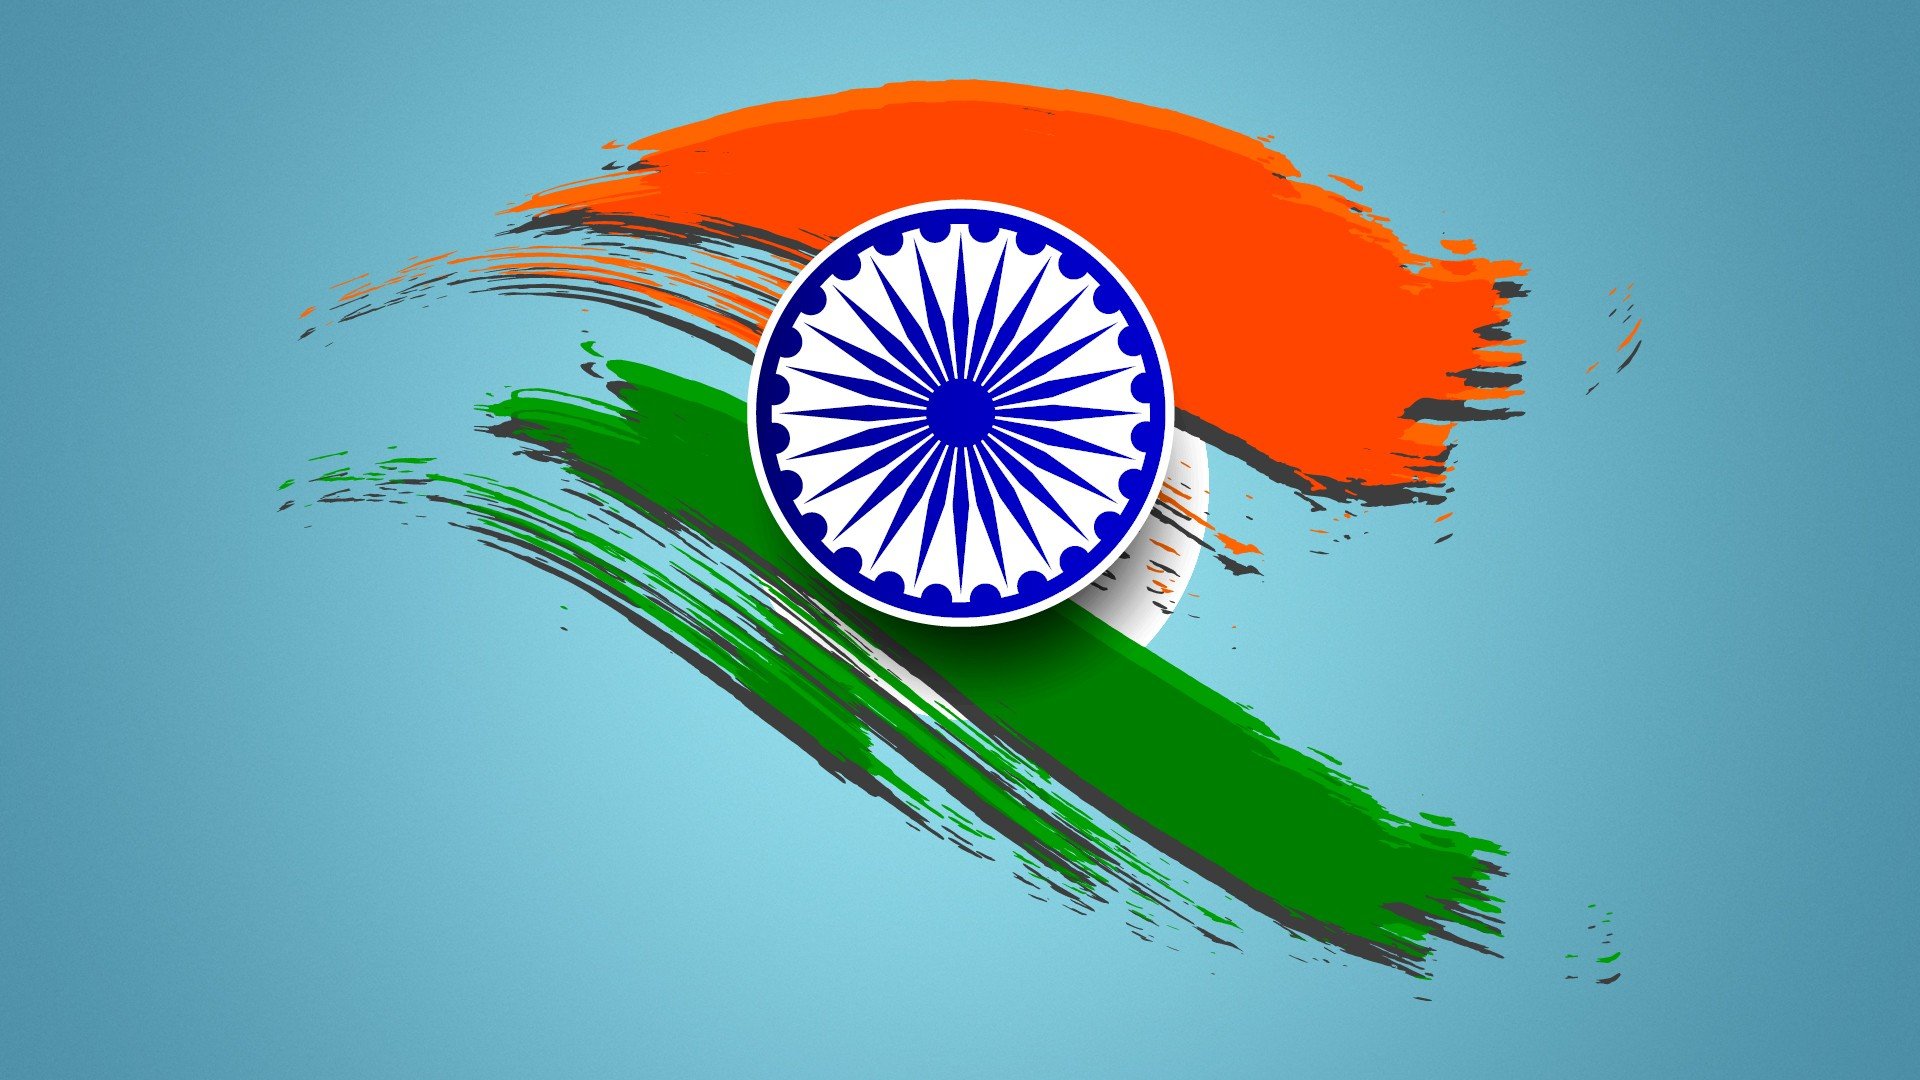 Free download Indian Independence Day Wallpaper Full HD 34902 Baltana [1920x1080] for your Desktop, Mobile & Tablet. Explore Independence Day Wallpaper. Independence Day Wallpaper, Independence Day Wallpaper, Pakistan Independence Day Wallpaper